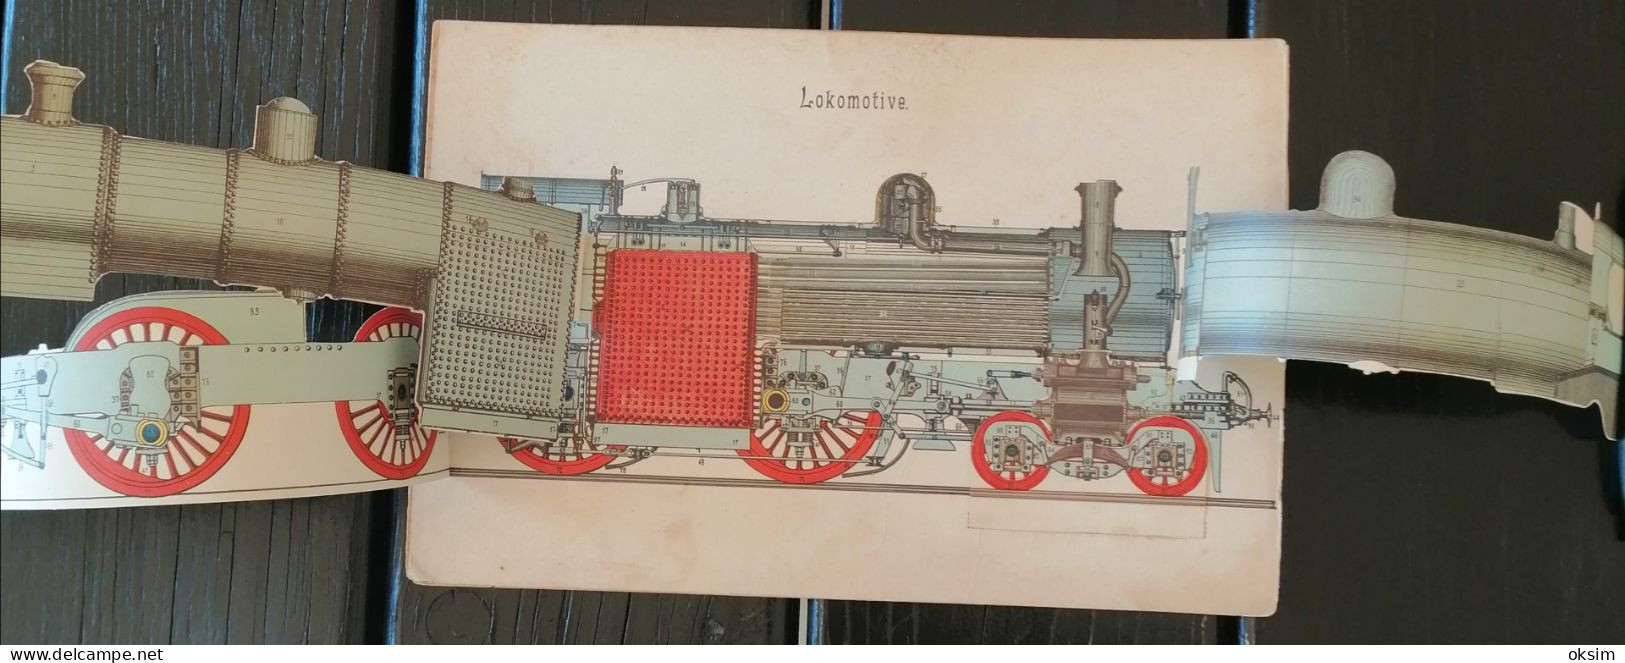 Drawings Of Machinery In Colour, Consisting Of Several Layers That Can Be Unfolded To Show The Interior Of The Machines - Machines